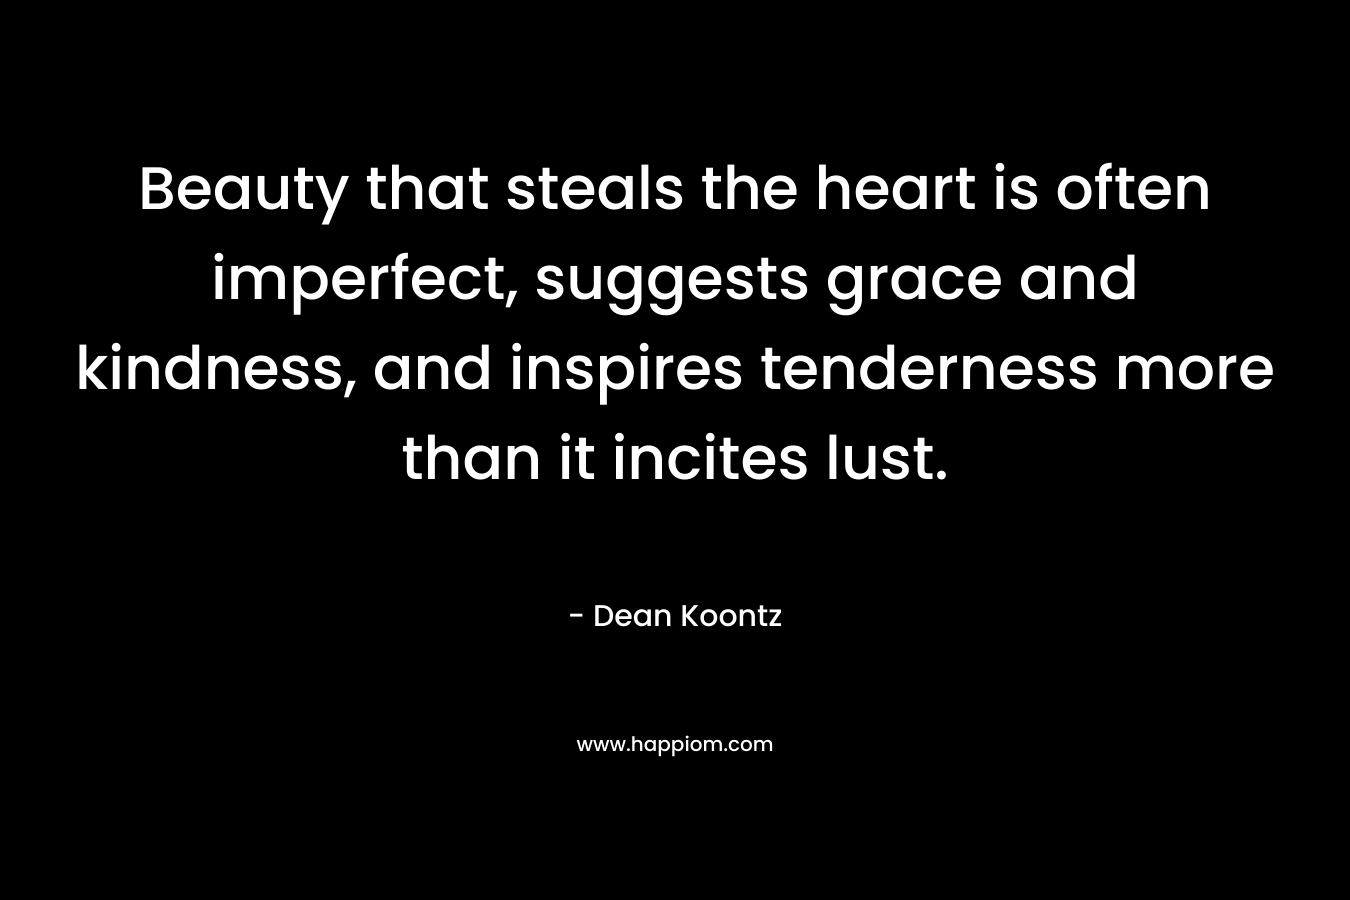 Beauty that steals the heart is often imperfect, suggests grace and kindness, and inspires tenderness more than it incites lust.